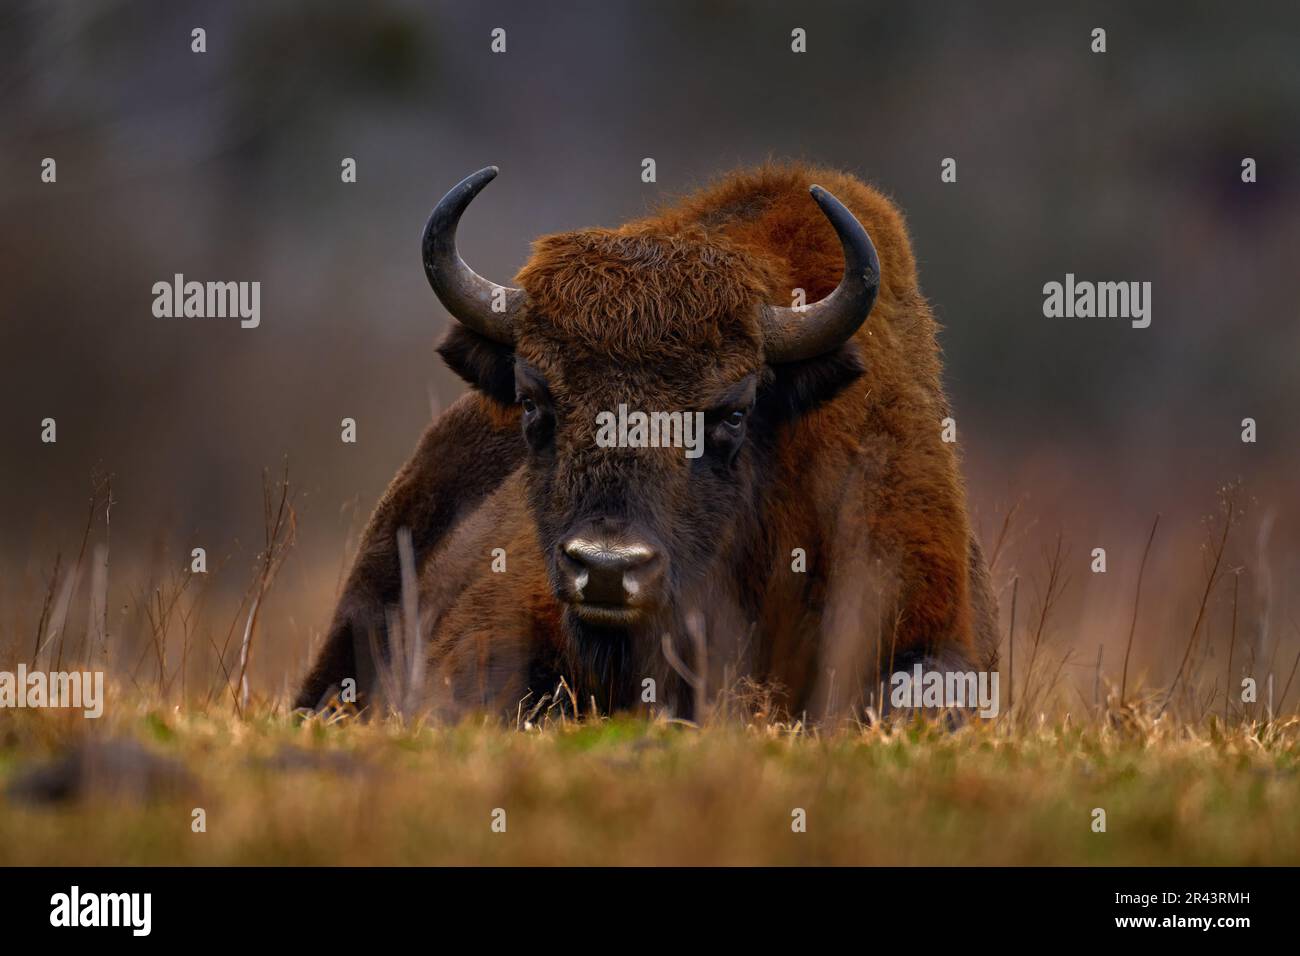 Bison in the autumn forest, sunny scene with big brown animal in the nature habitat, yellow leaves on the rain trees, Bialowieza NP, Poland. Wildlife Stock Photo